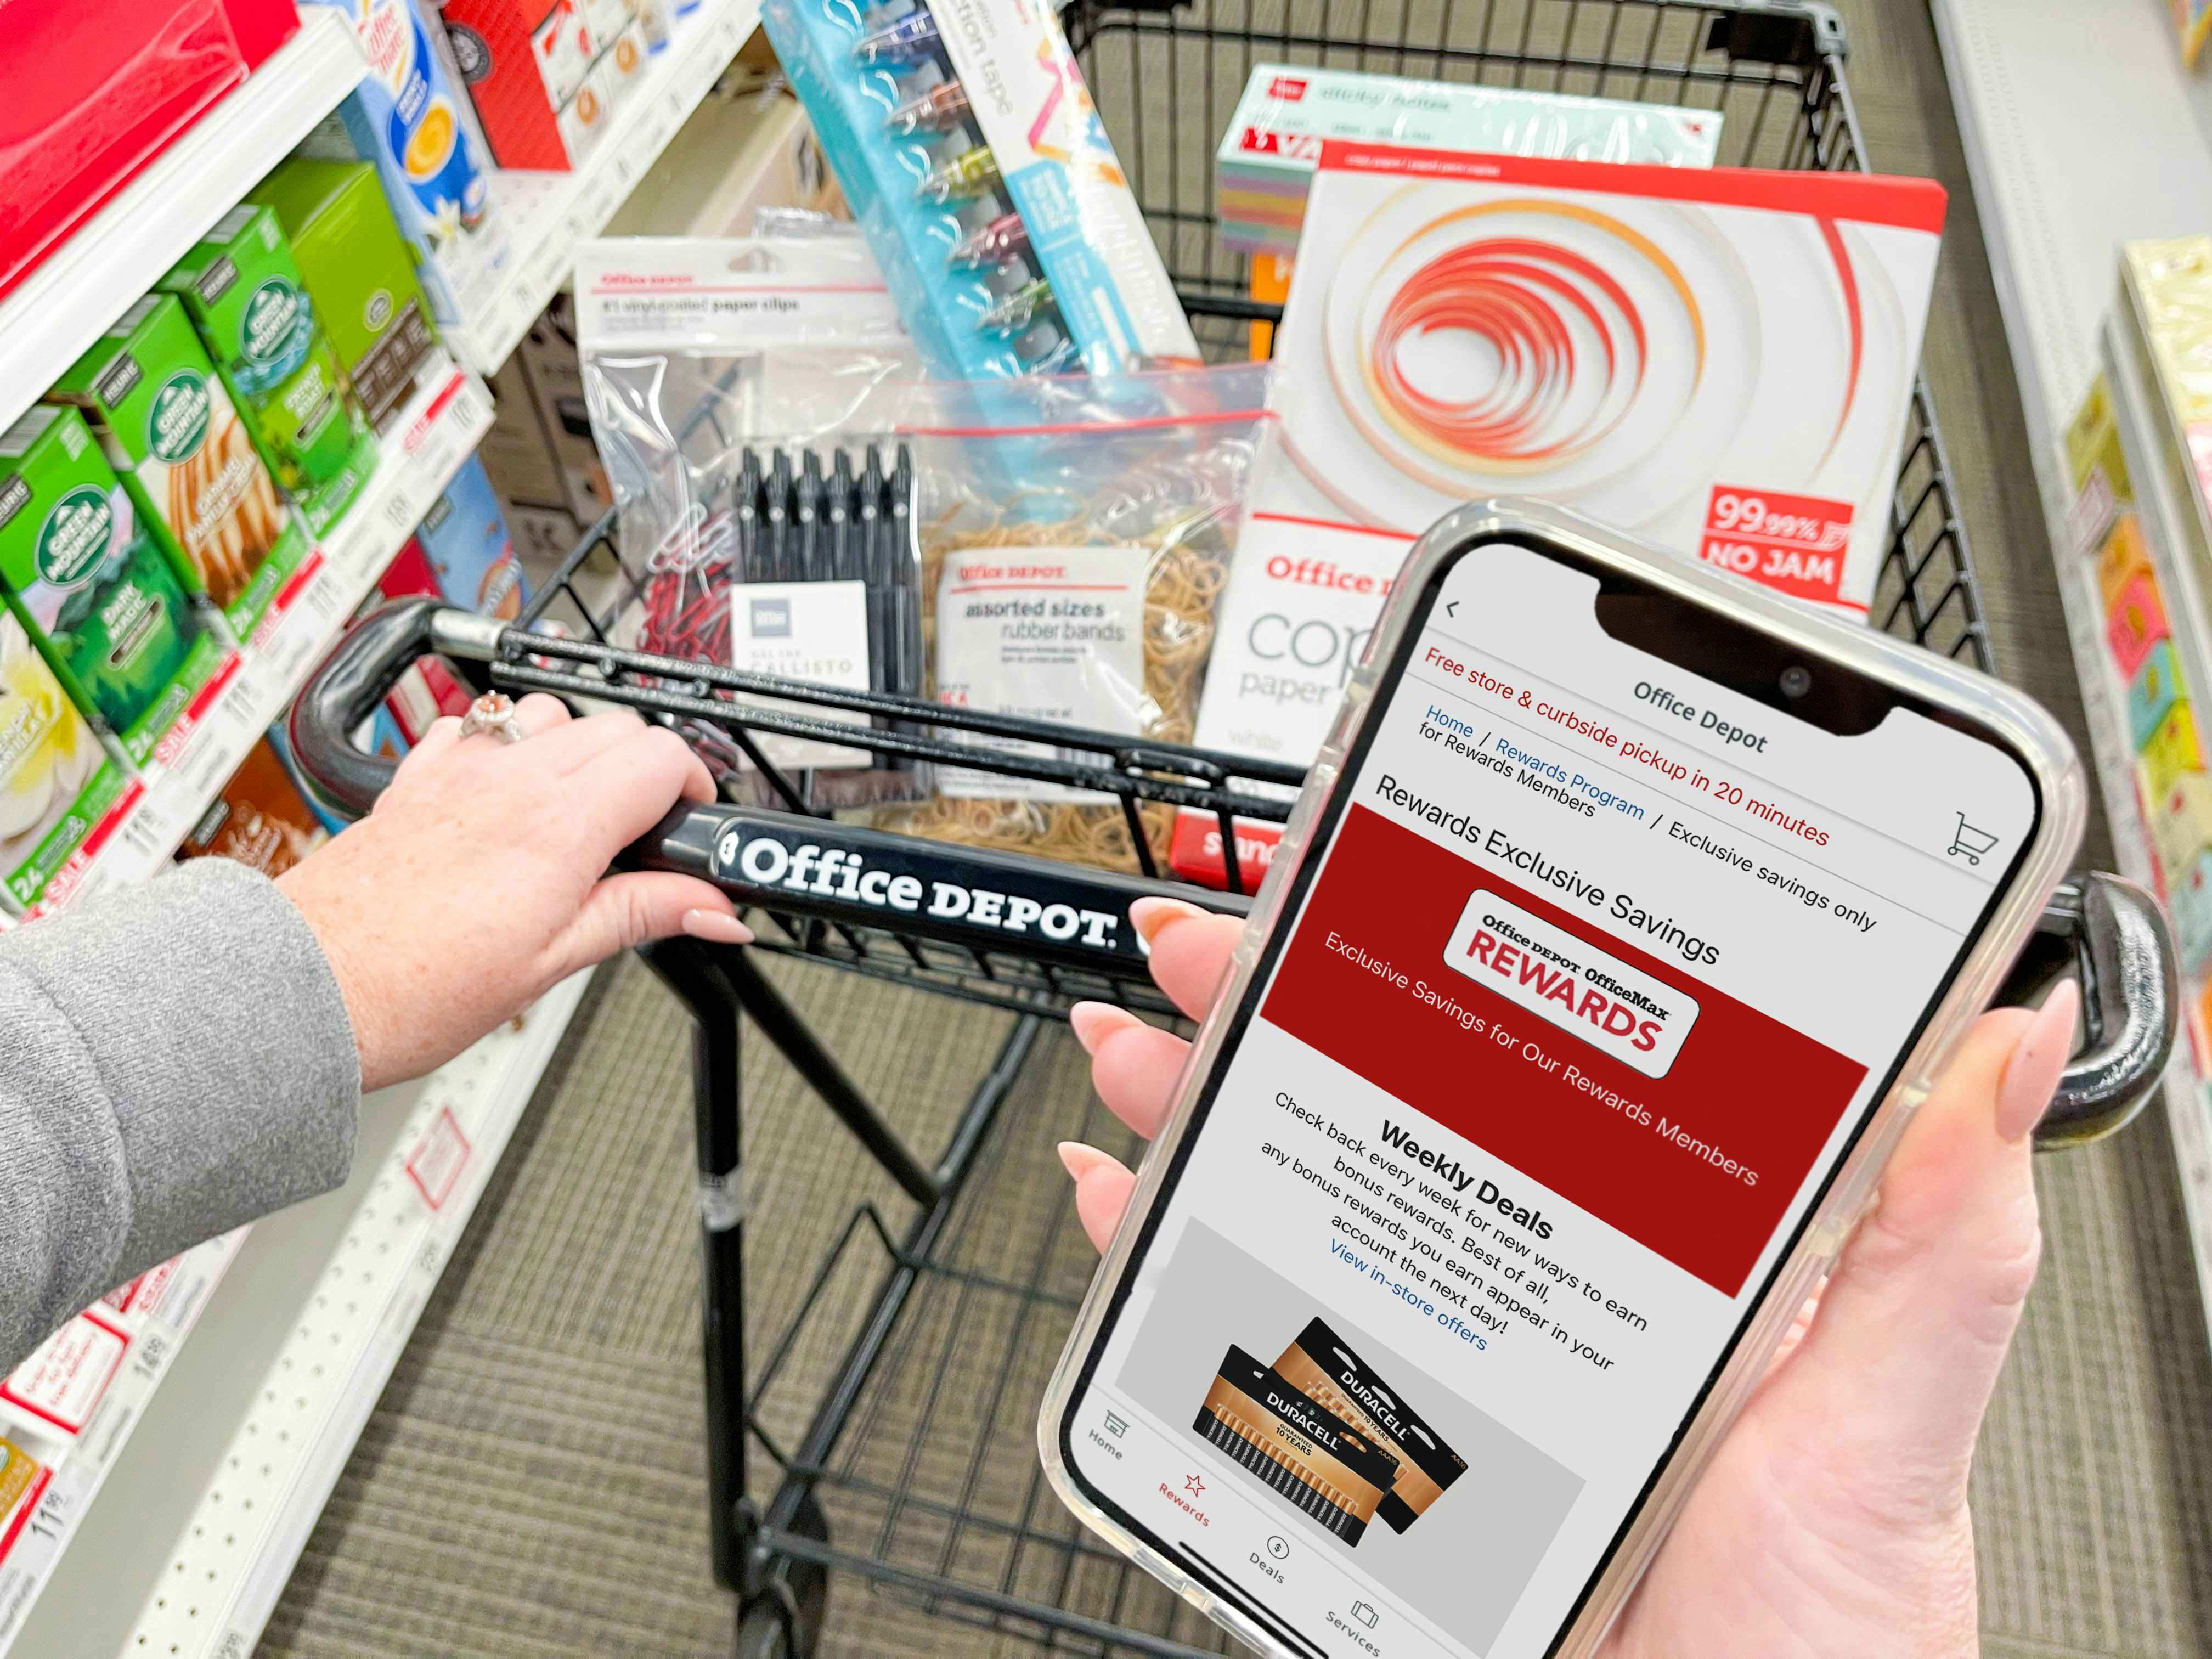 A person's hand holding an iPhone that is displaying the Office Depot mobile app's Rewards page. In the background, the person's other hand is pushing an Office Depot shopping cart full of office supplies down an aisle at Office Depot.